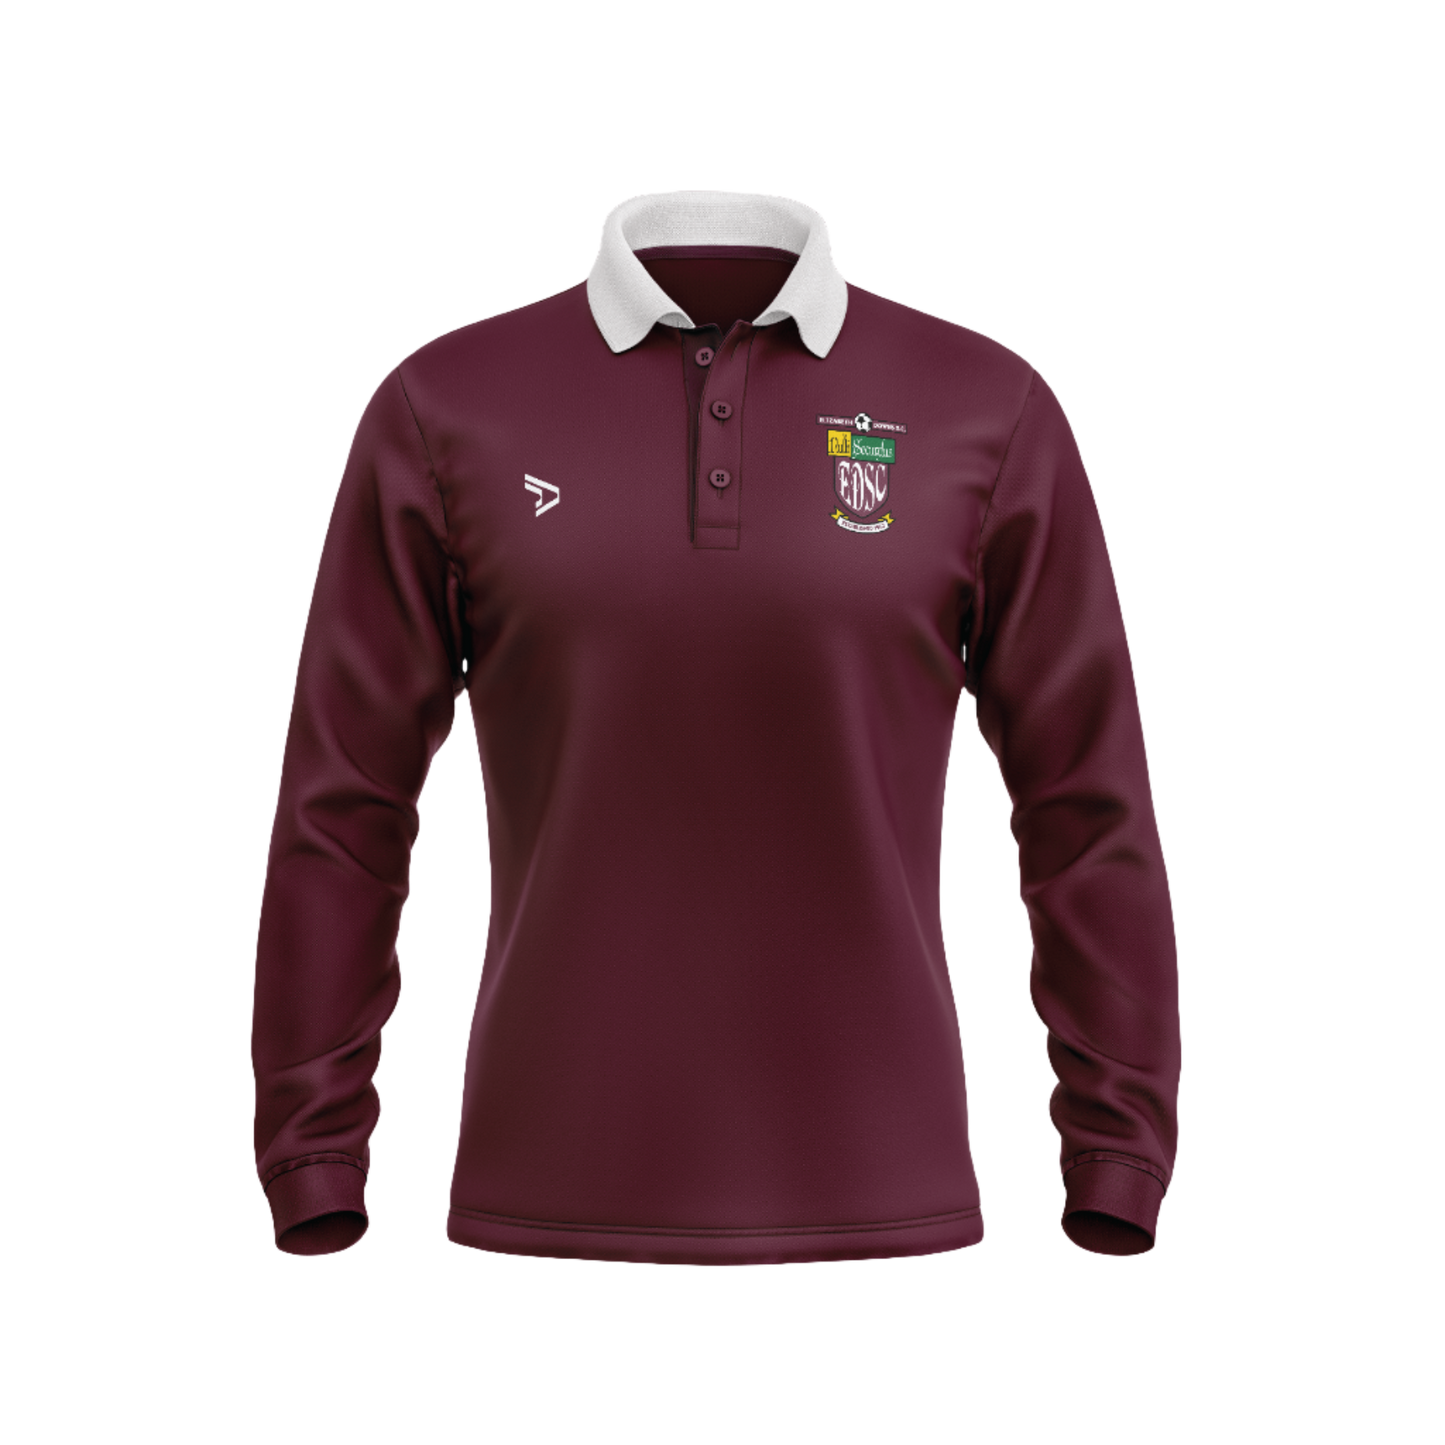 EDSC RUGBY TOP (PRE ORDER NOW)